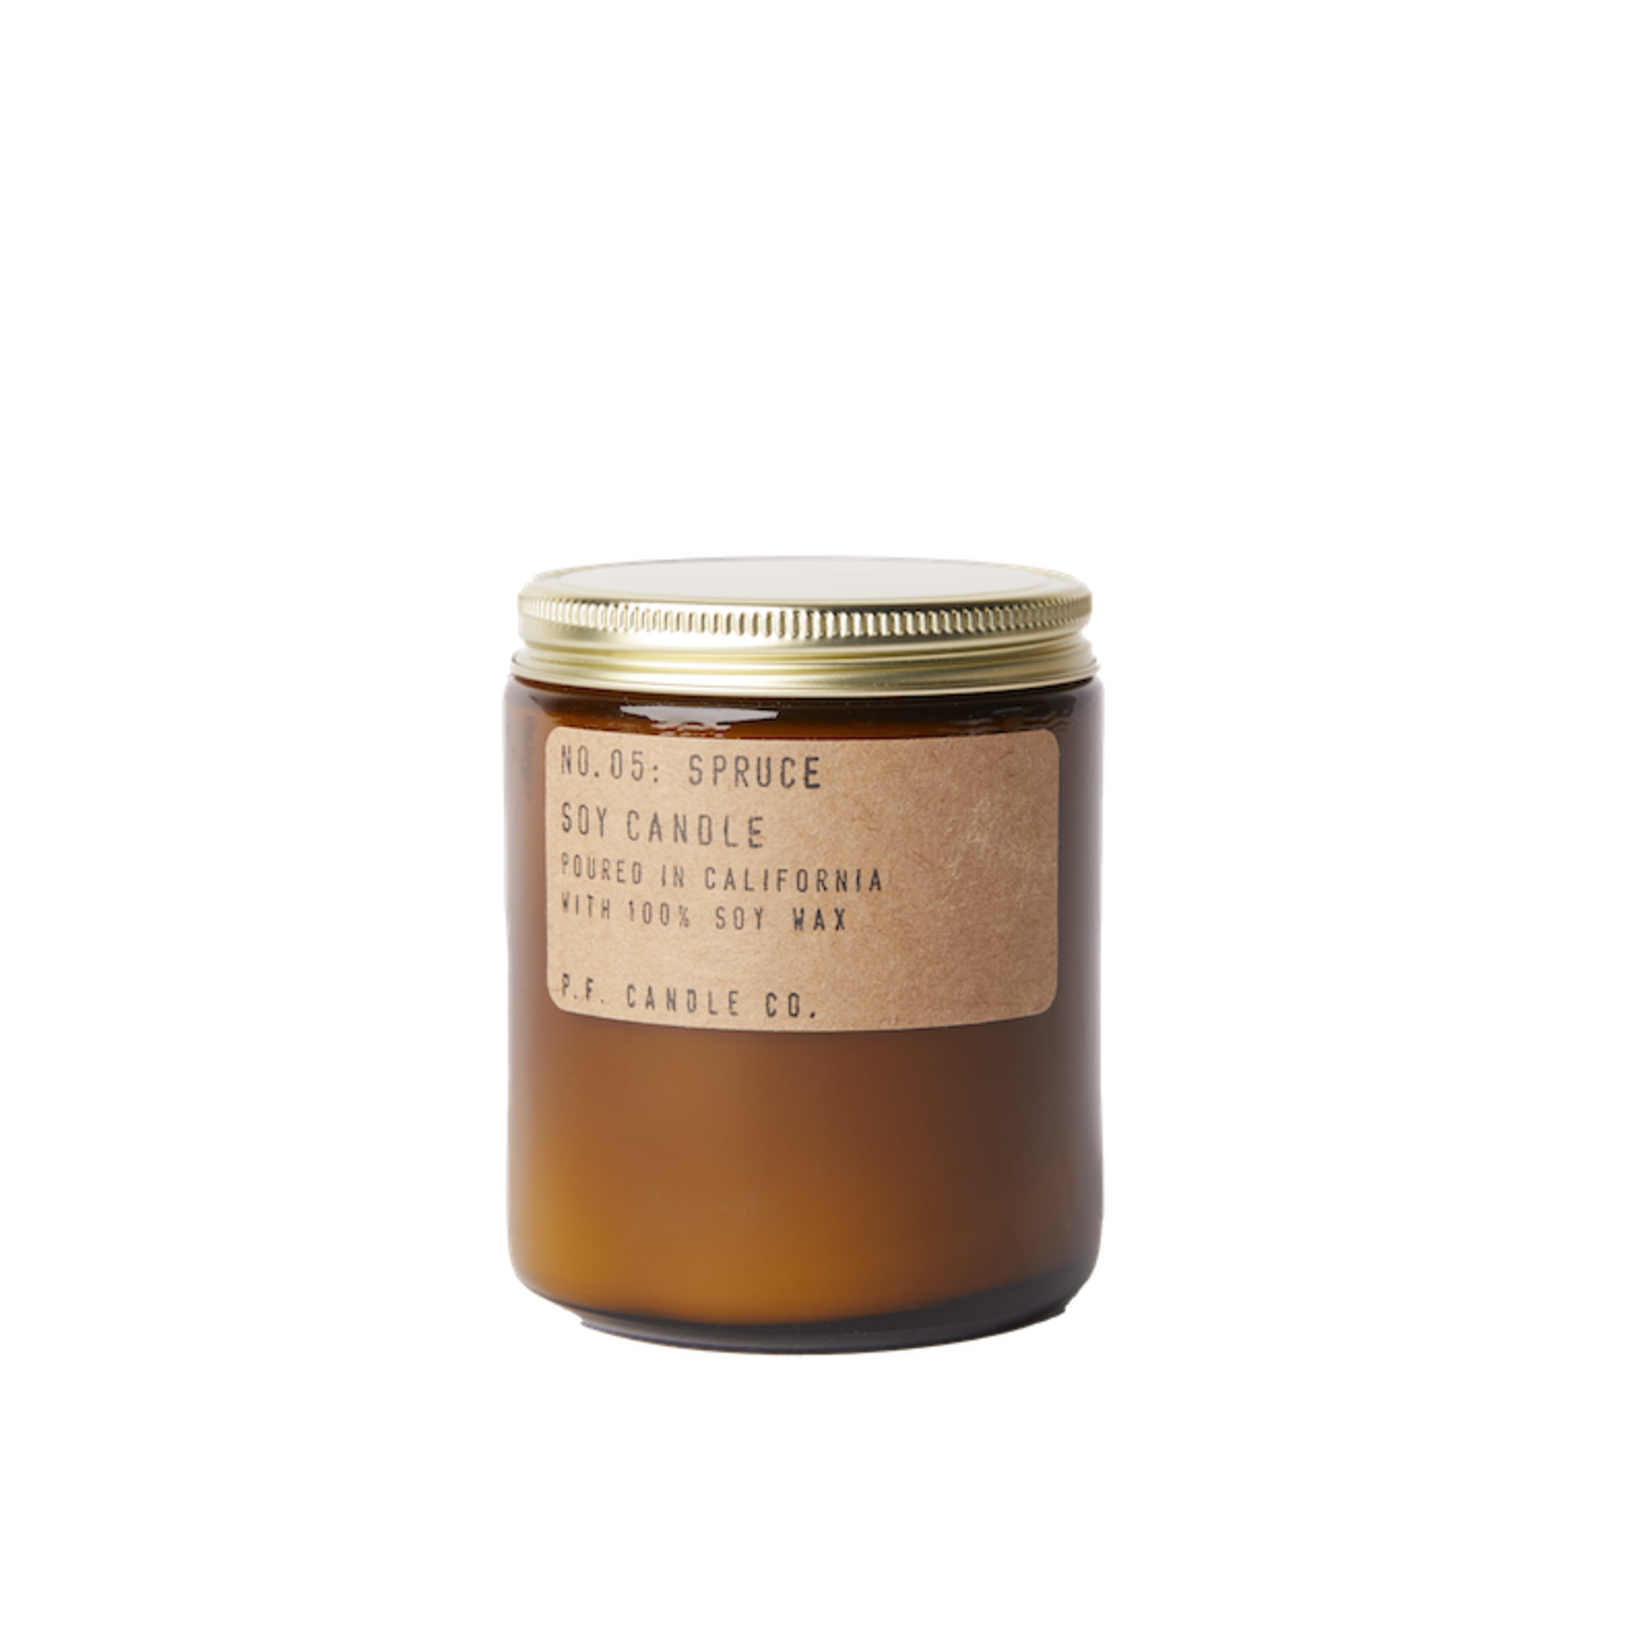 P.F. Candle Co. Spruce - 7.2 oz Standard Soy Candle